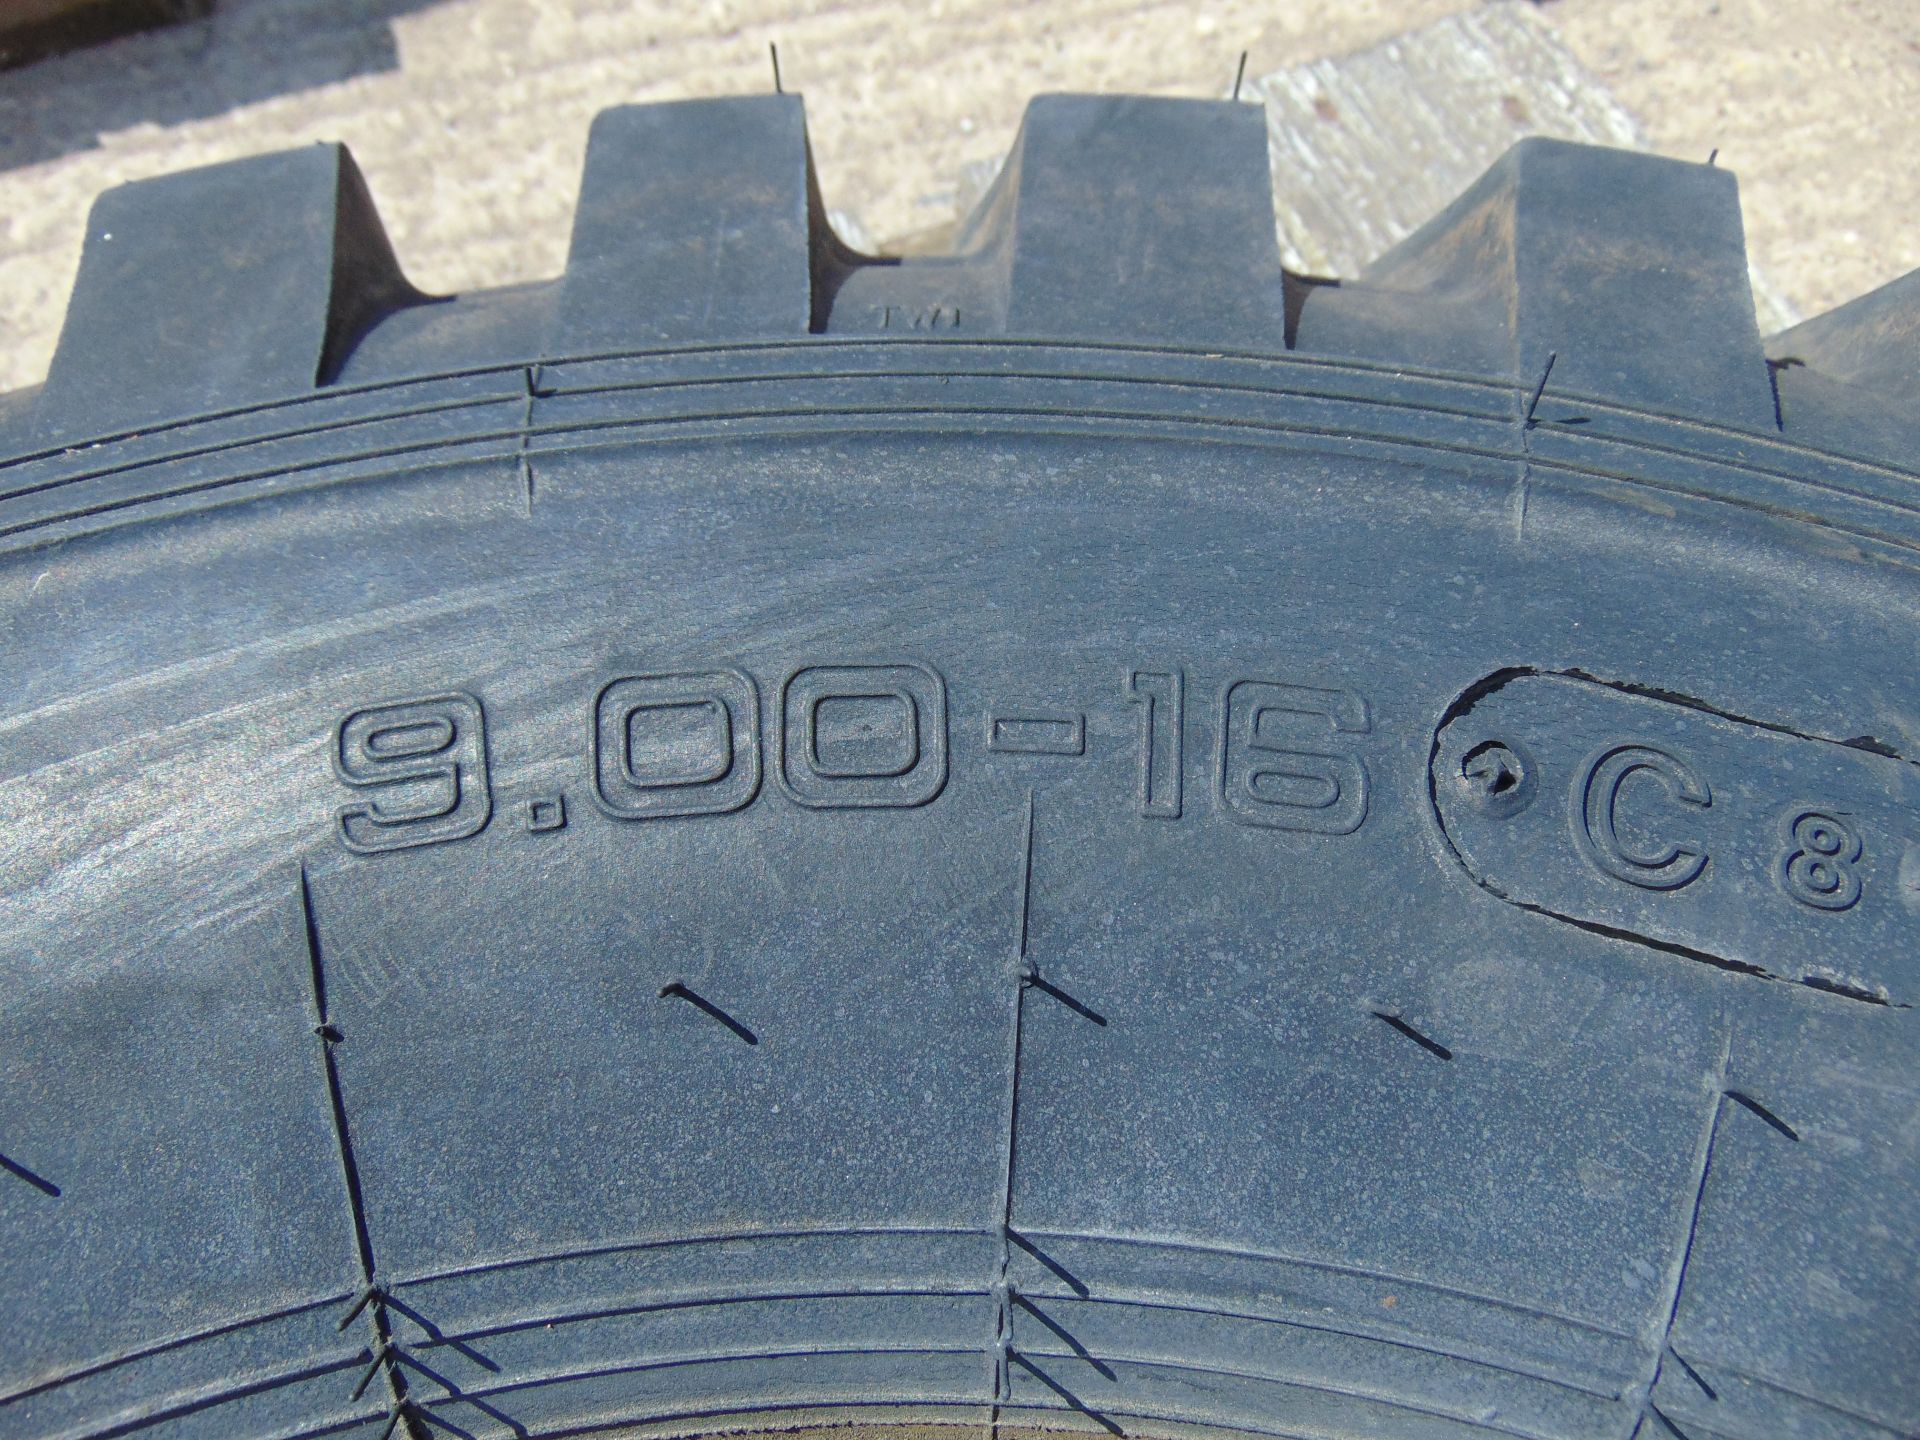 1 x Petlas 9.00 x 16 Tyre complete with 5 stud rim - Image 5 of 6